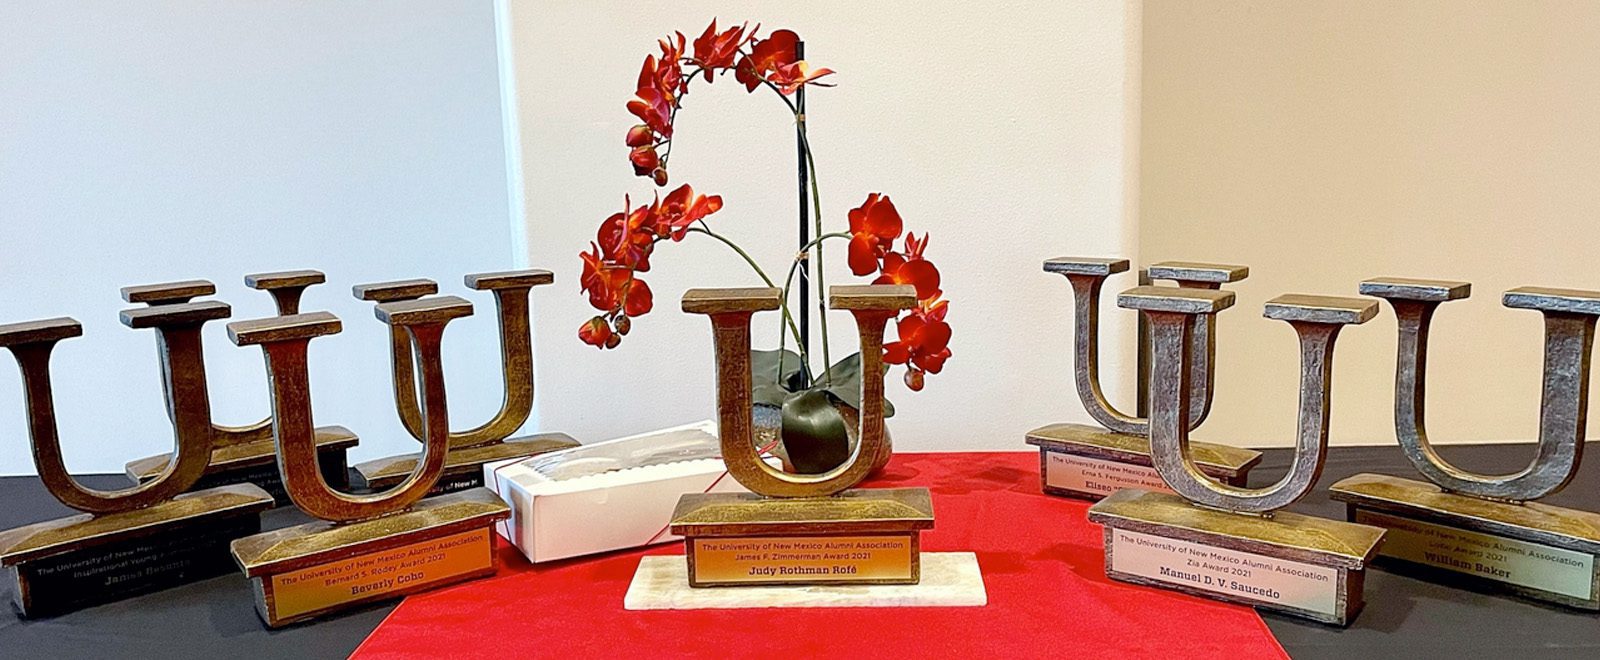 UNM Alumni award trophies on a red tablecloth